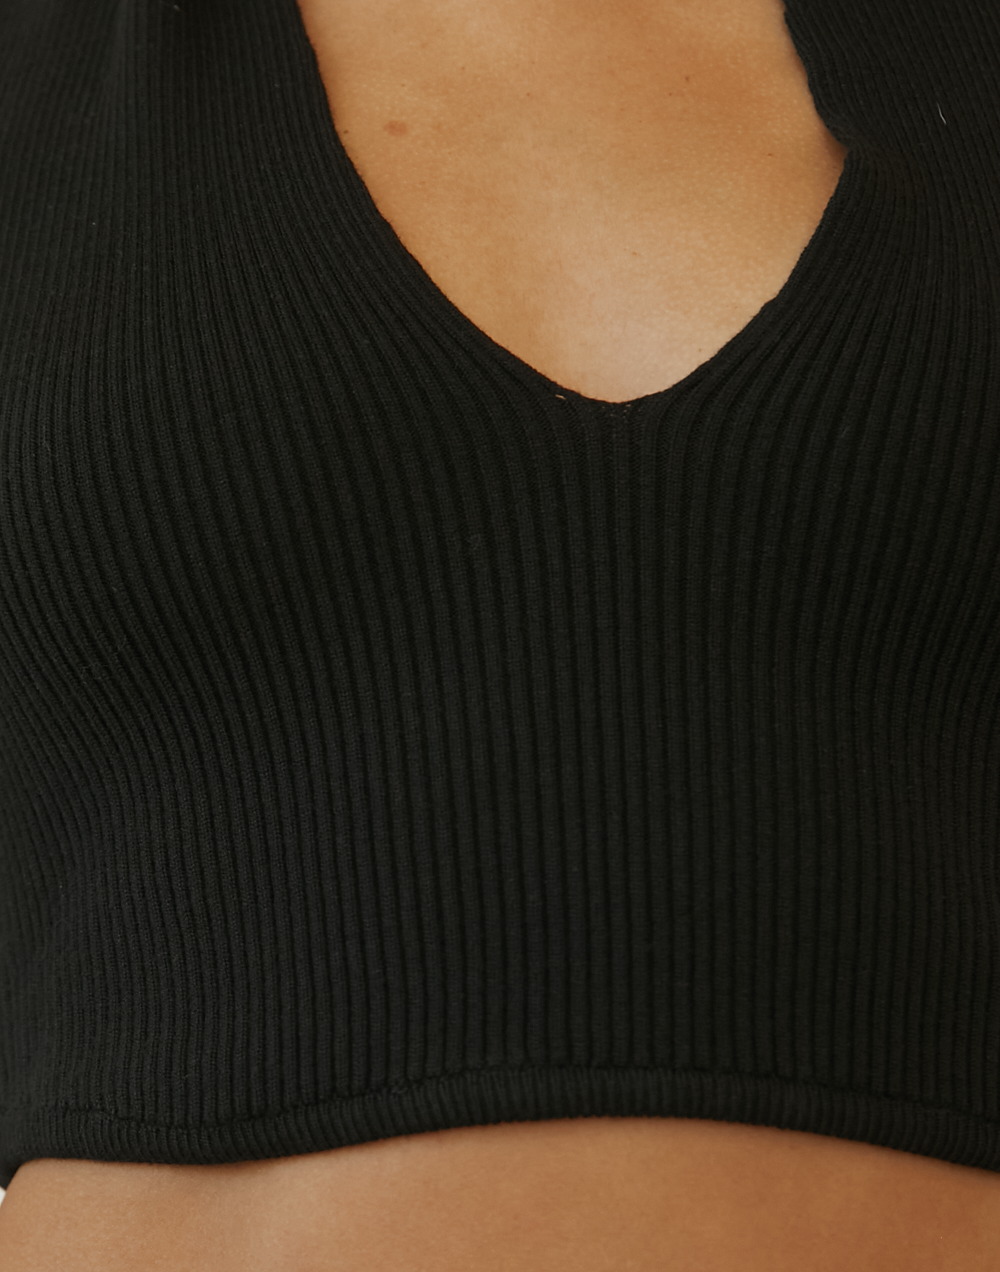 Tienna Knit Top (Black) - Long Sleeve Knit Top - Women's Top - Charcoal Clothing